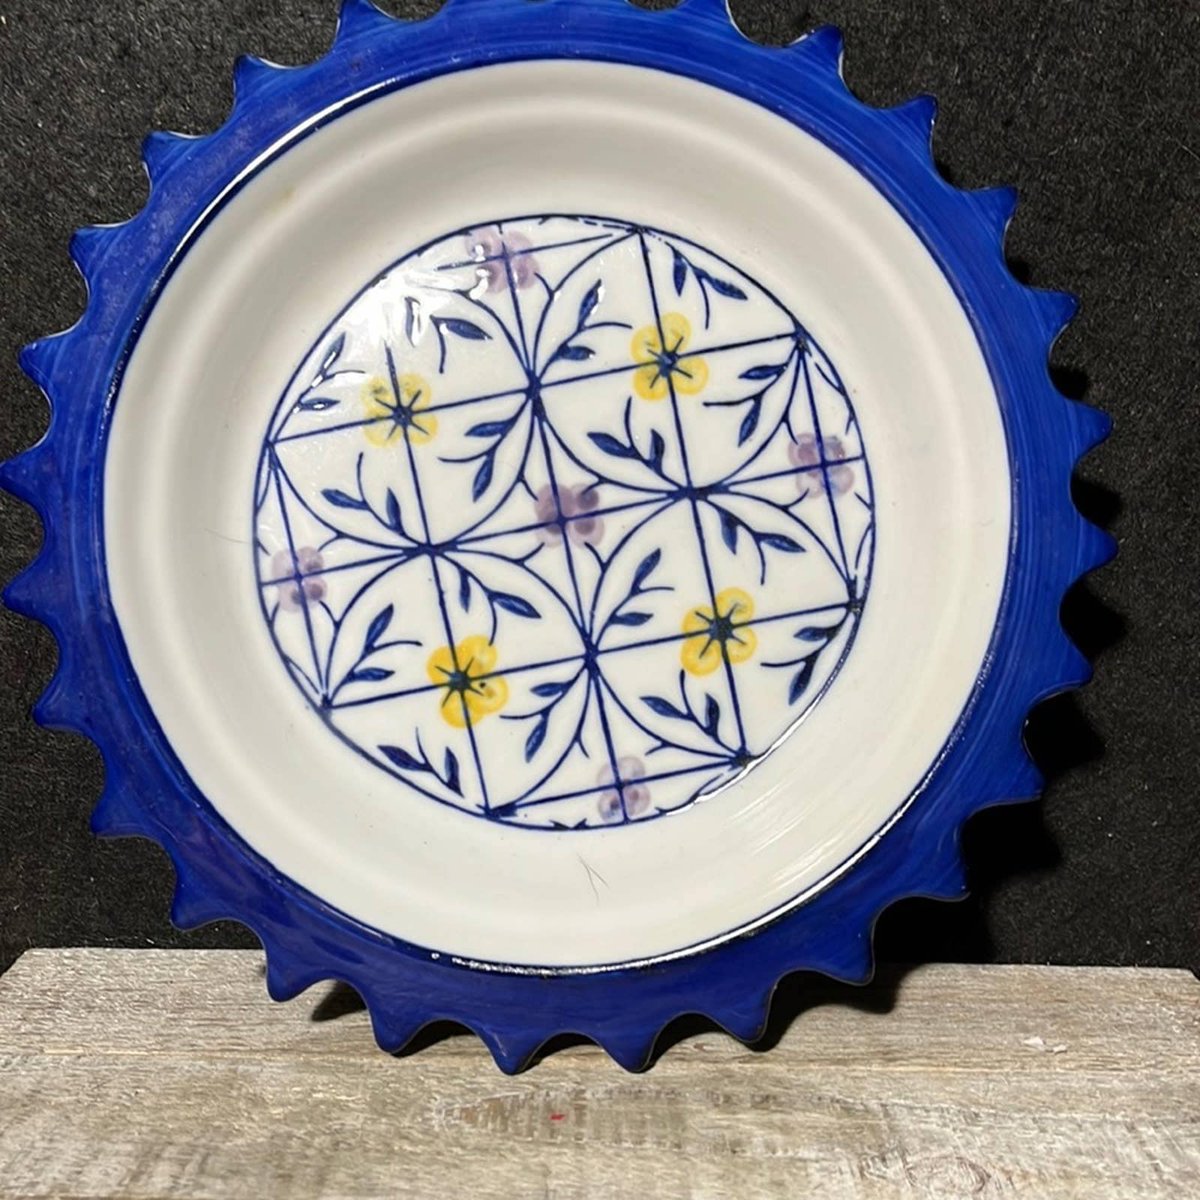 Excited to share the latest addition to my #etsy shop: 1 Vintage Scalloped Hand Painted Pottery Plates Blue and White etsy.me/3MBxMsN #blue #vintageplate #handpainted #pottery #blueandwhite #decorativeplate #thenowandthenmarket